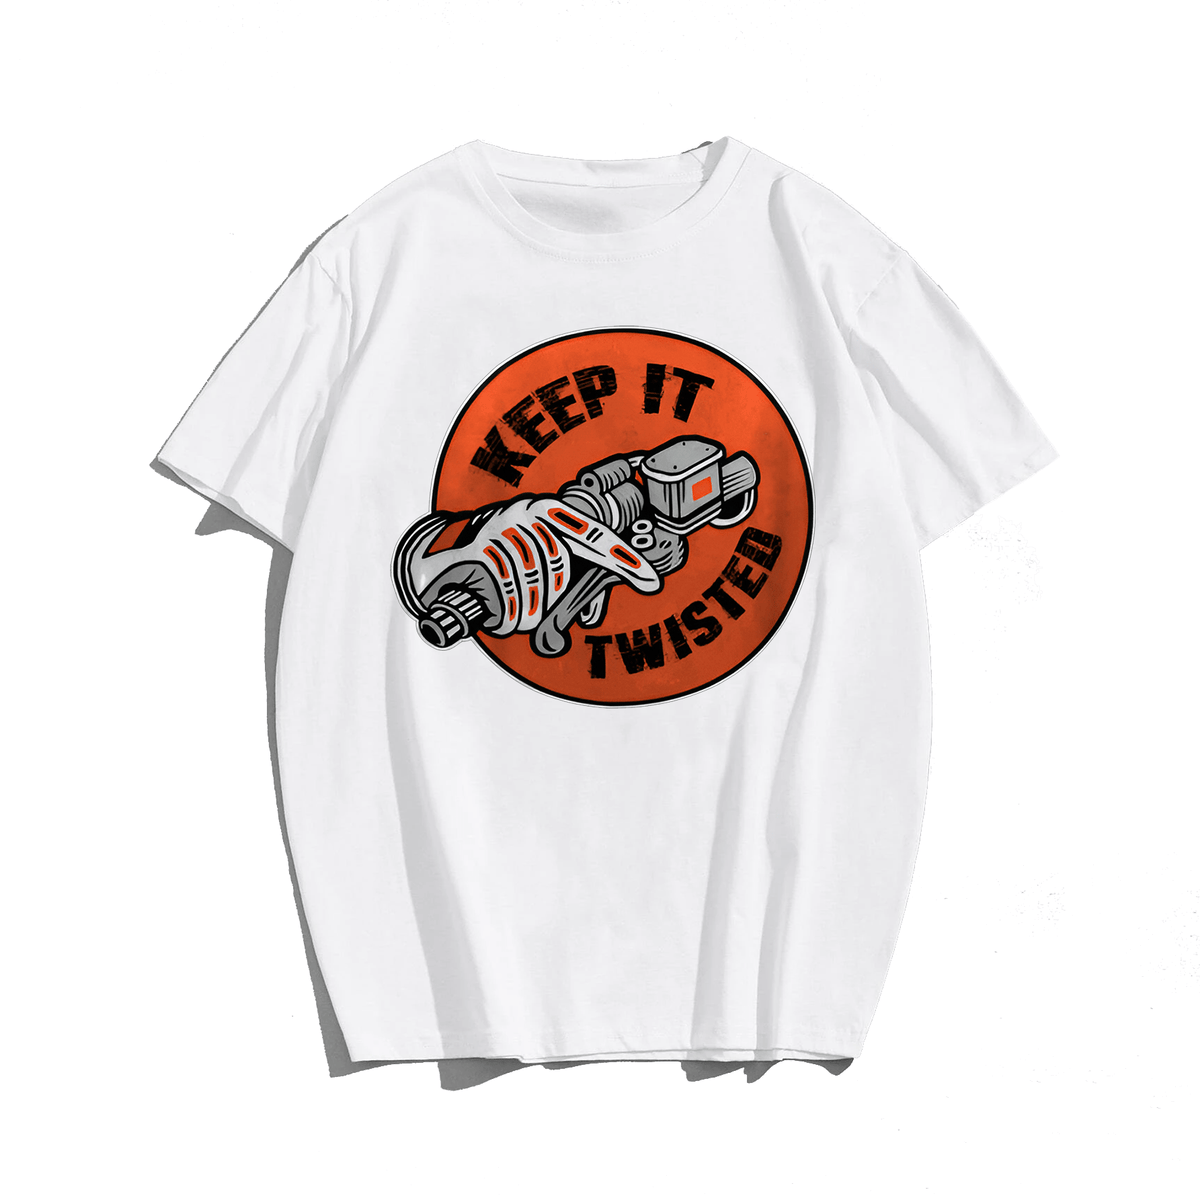 Keep It Twisted Plus Size T-Shirt, Creative Men Plus Size Oversize T-shirt for Big & Tall Man